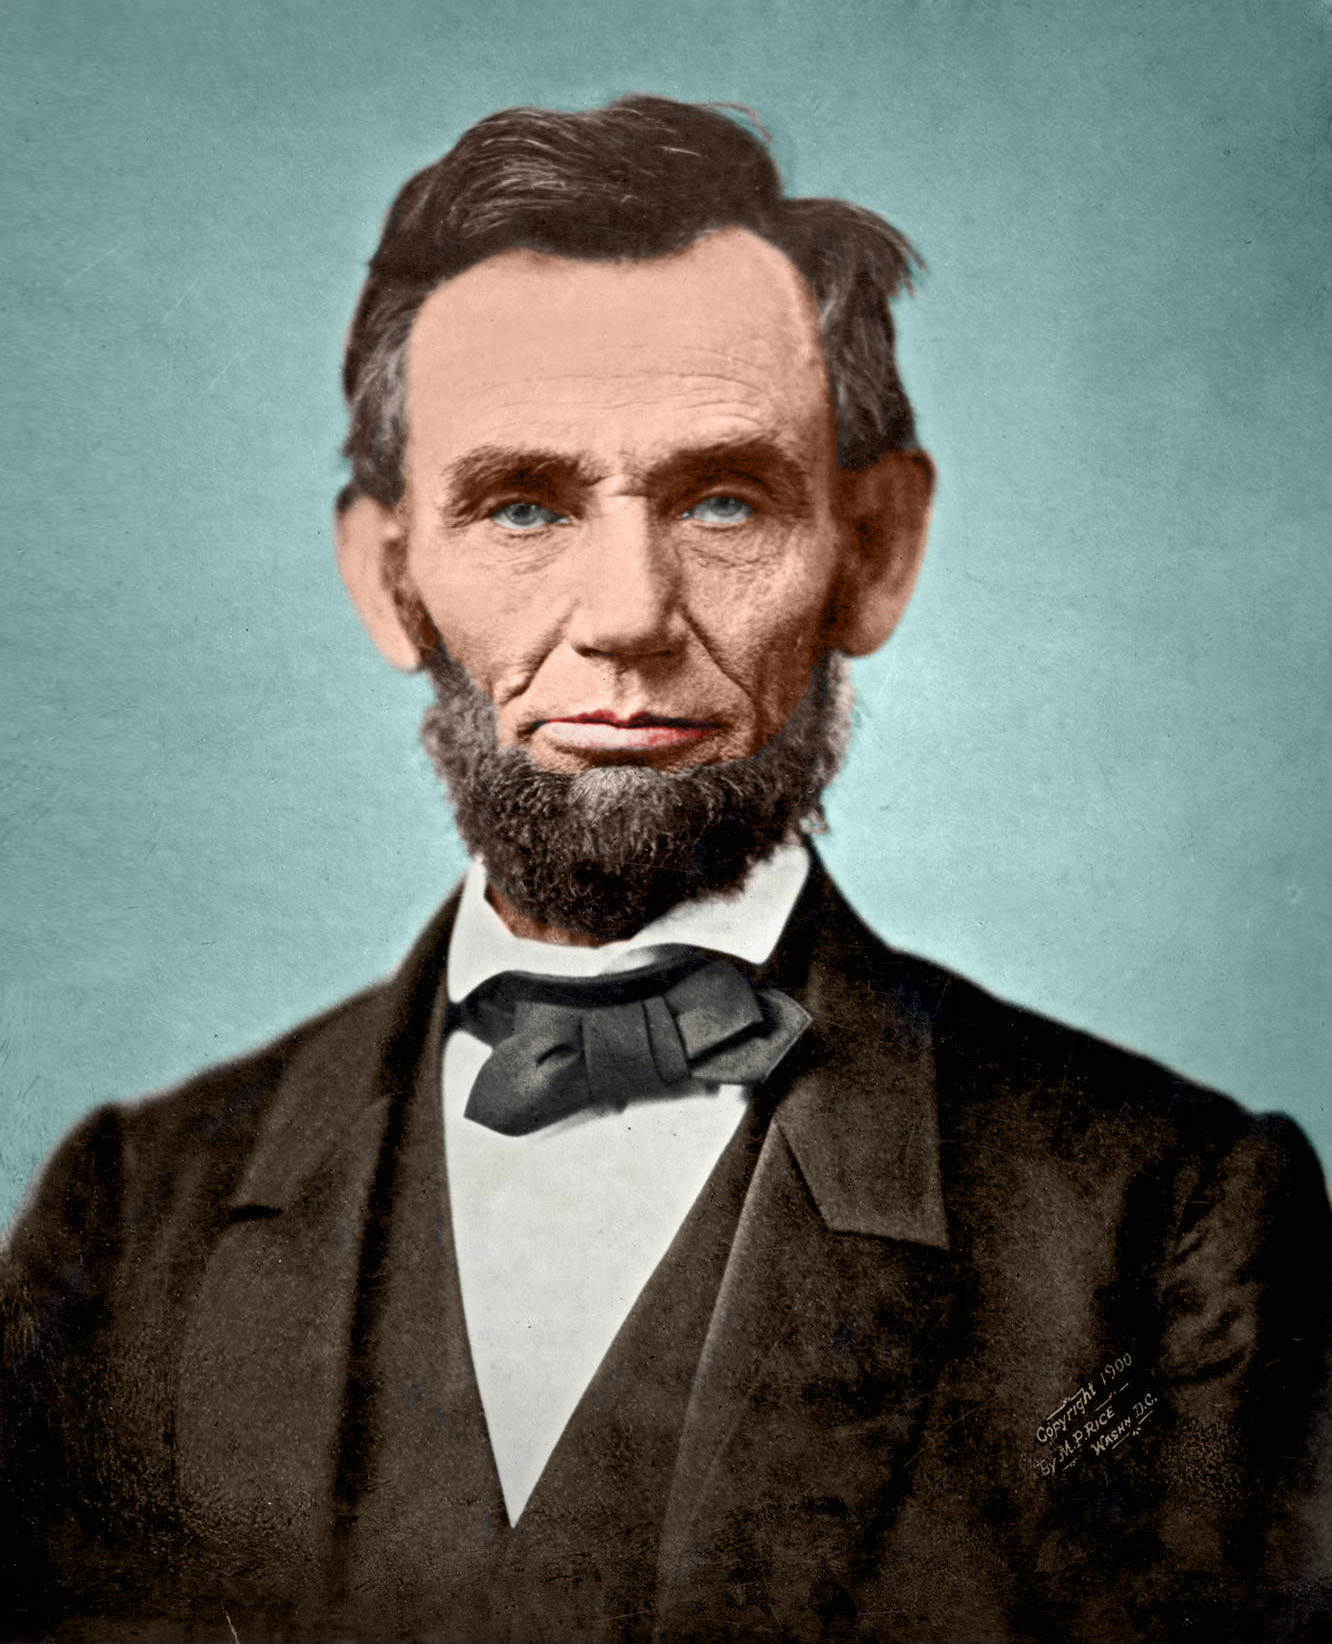 abraham lincoln and his wife in color